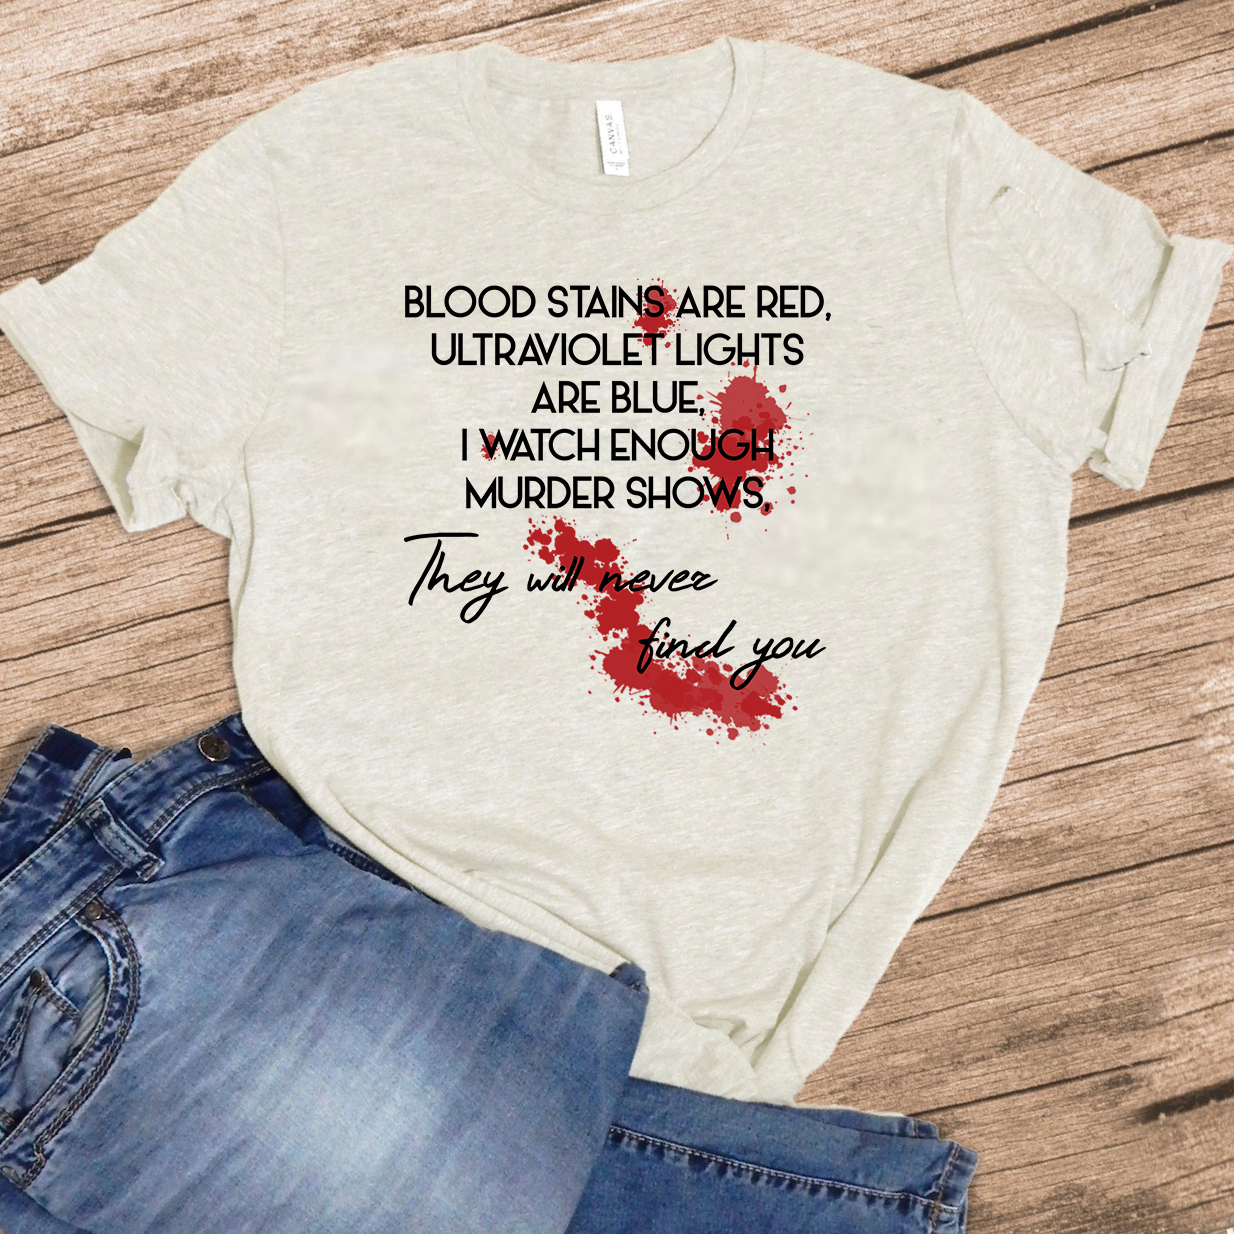 Blood Stains Are Red - Oatmeal tee